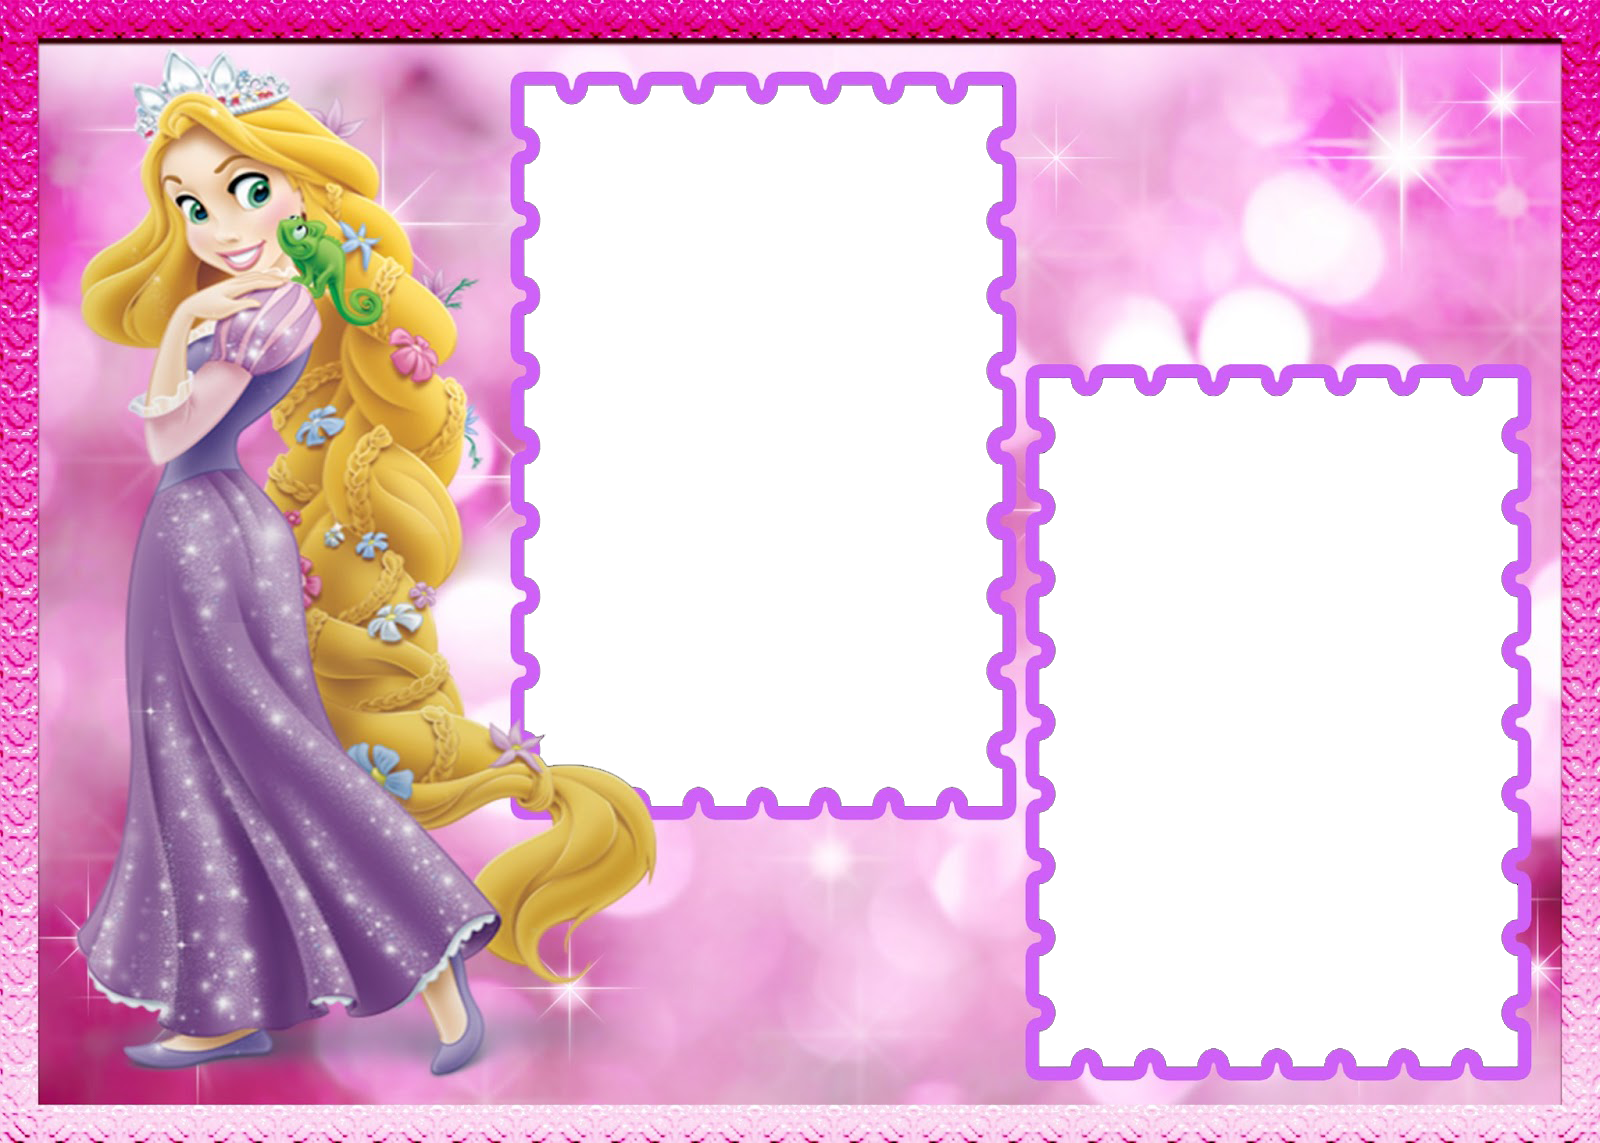 Rapunzel Frame Wallpapers High Quality | Download Free